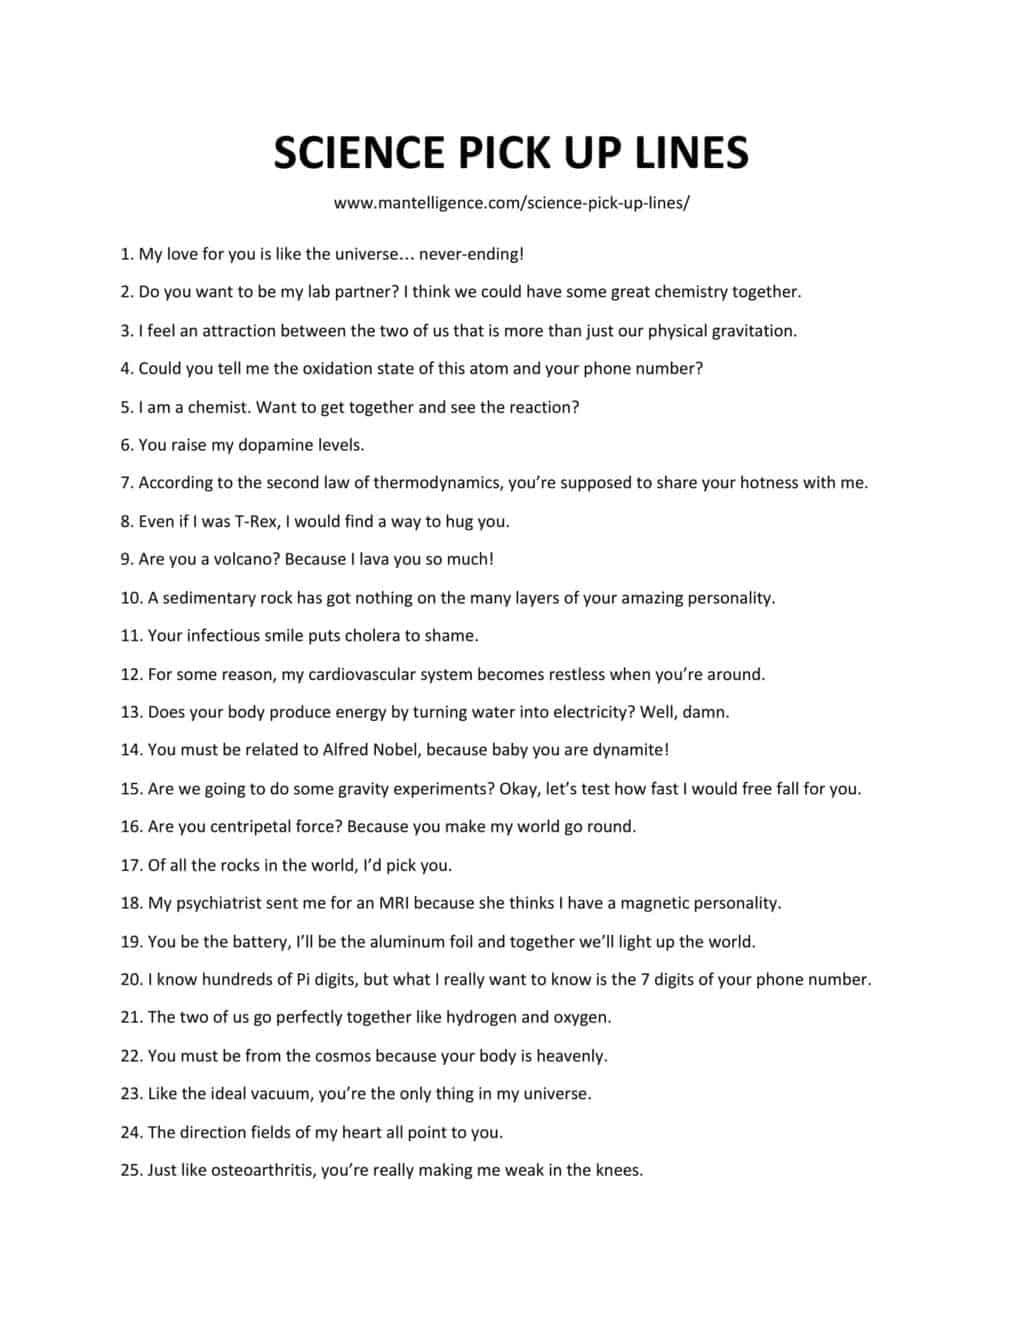 Downloadable and Printable List of Science Pick Up Lines as jpg or pdf